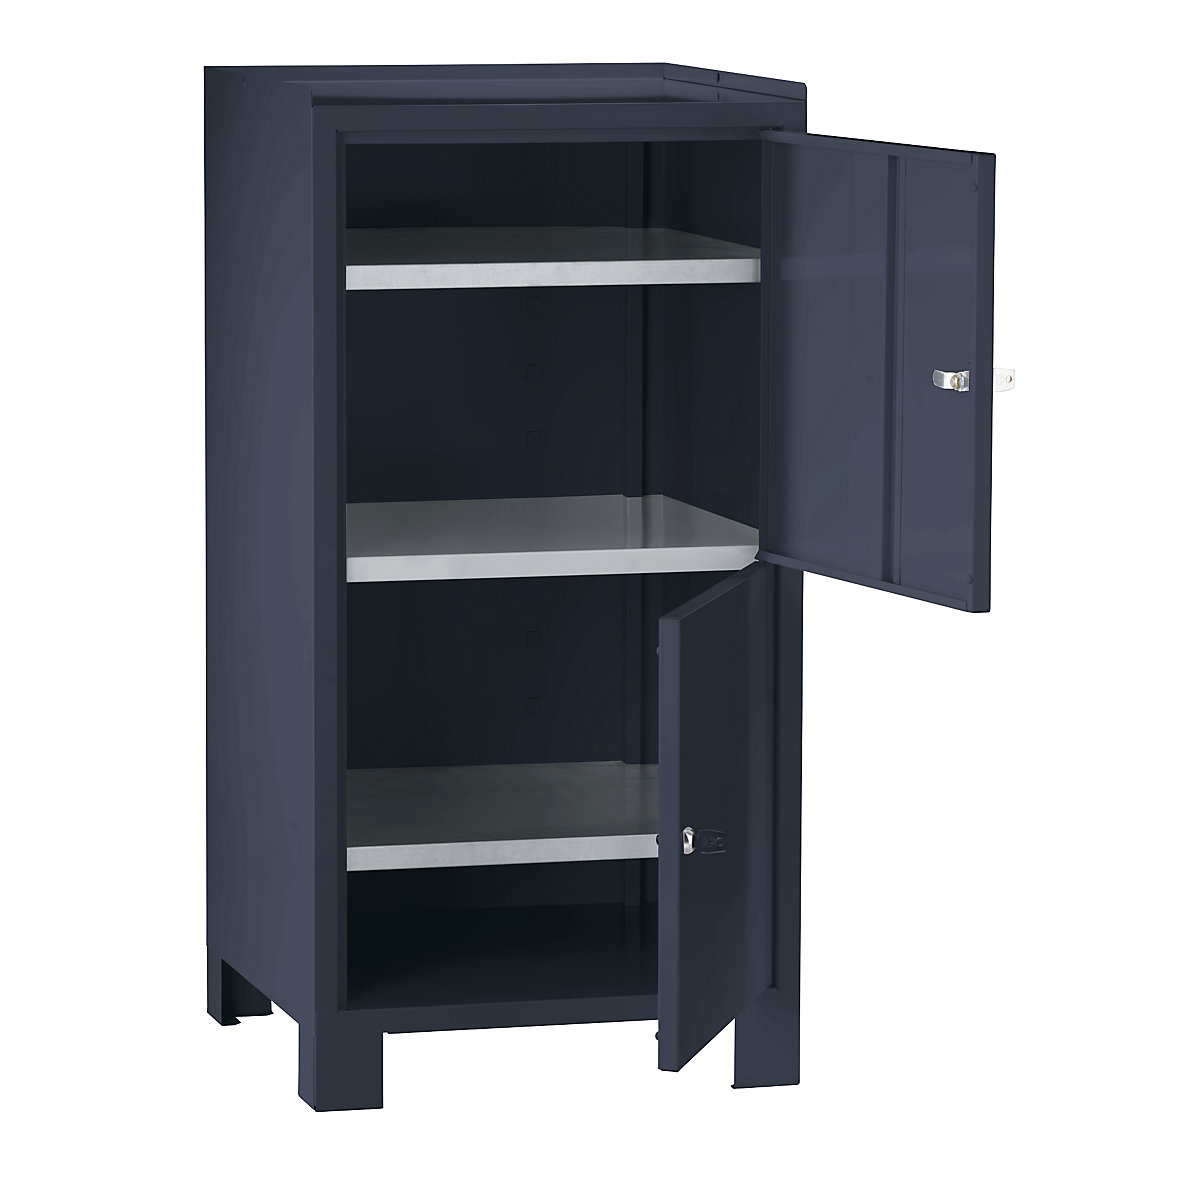 Tool cupboard with feet – Wolf, HxWxD 1000 x 500 x 500 mm, 2 lockable compartments with 1 shelf each, charcoal RAL 7016-10